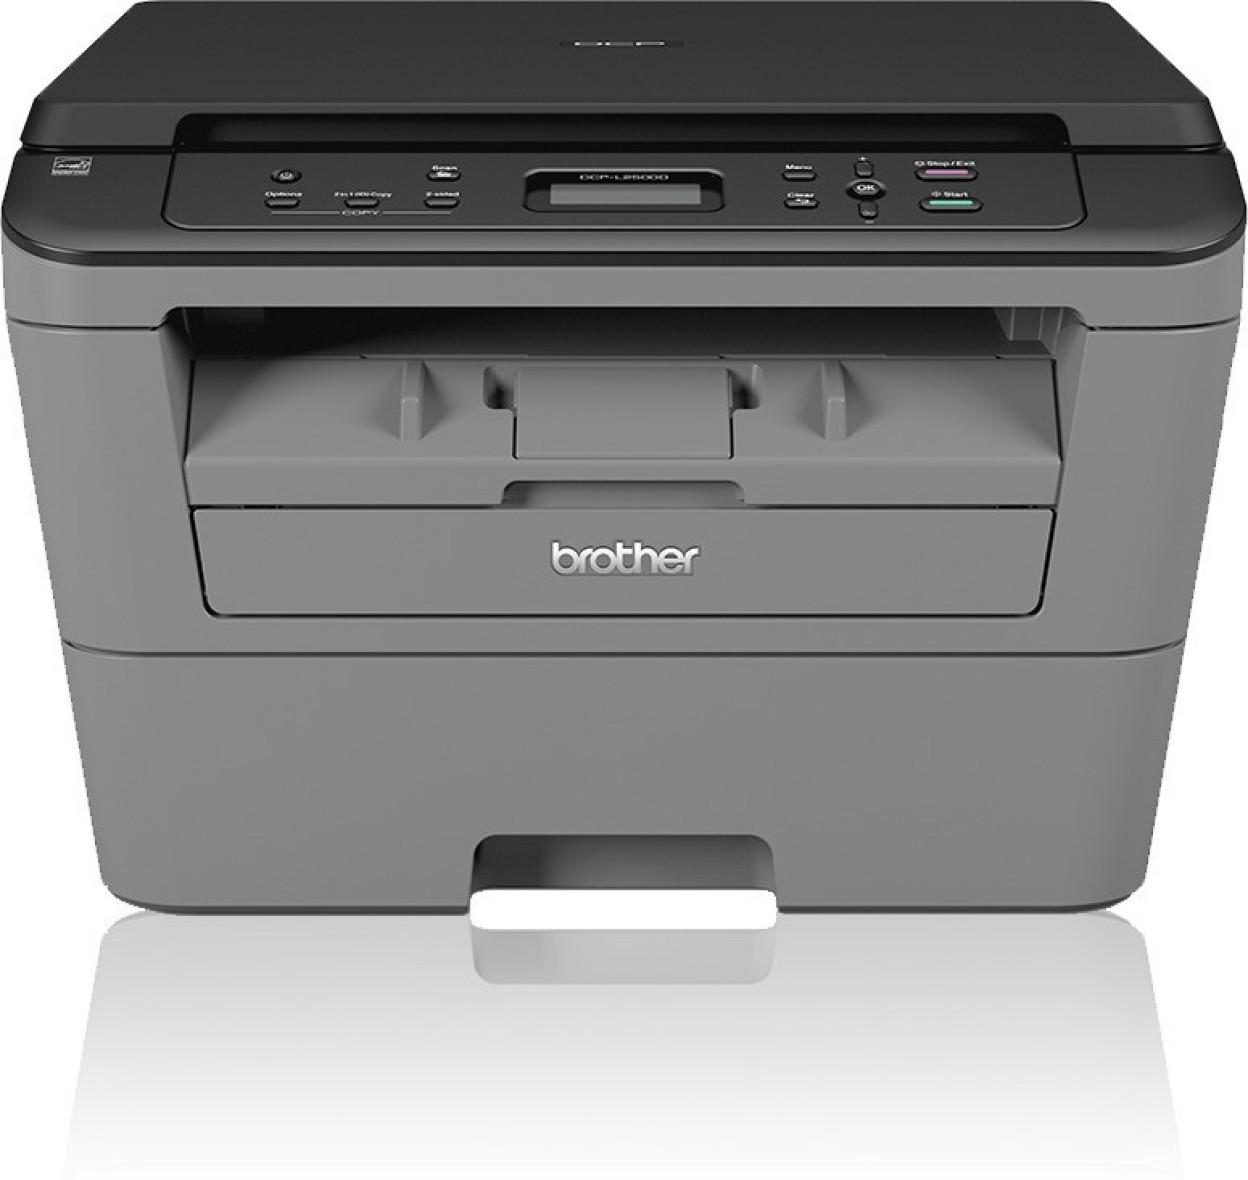 brother printer and scanner drivers windows 10